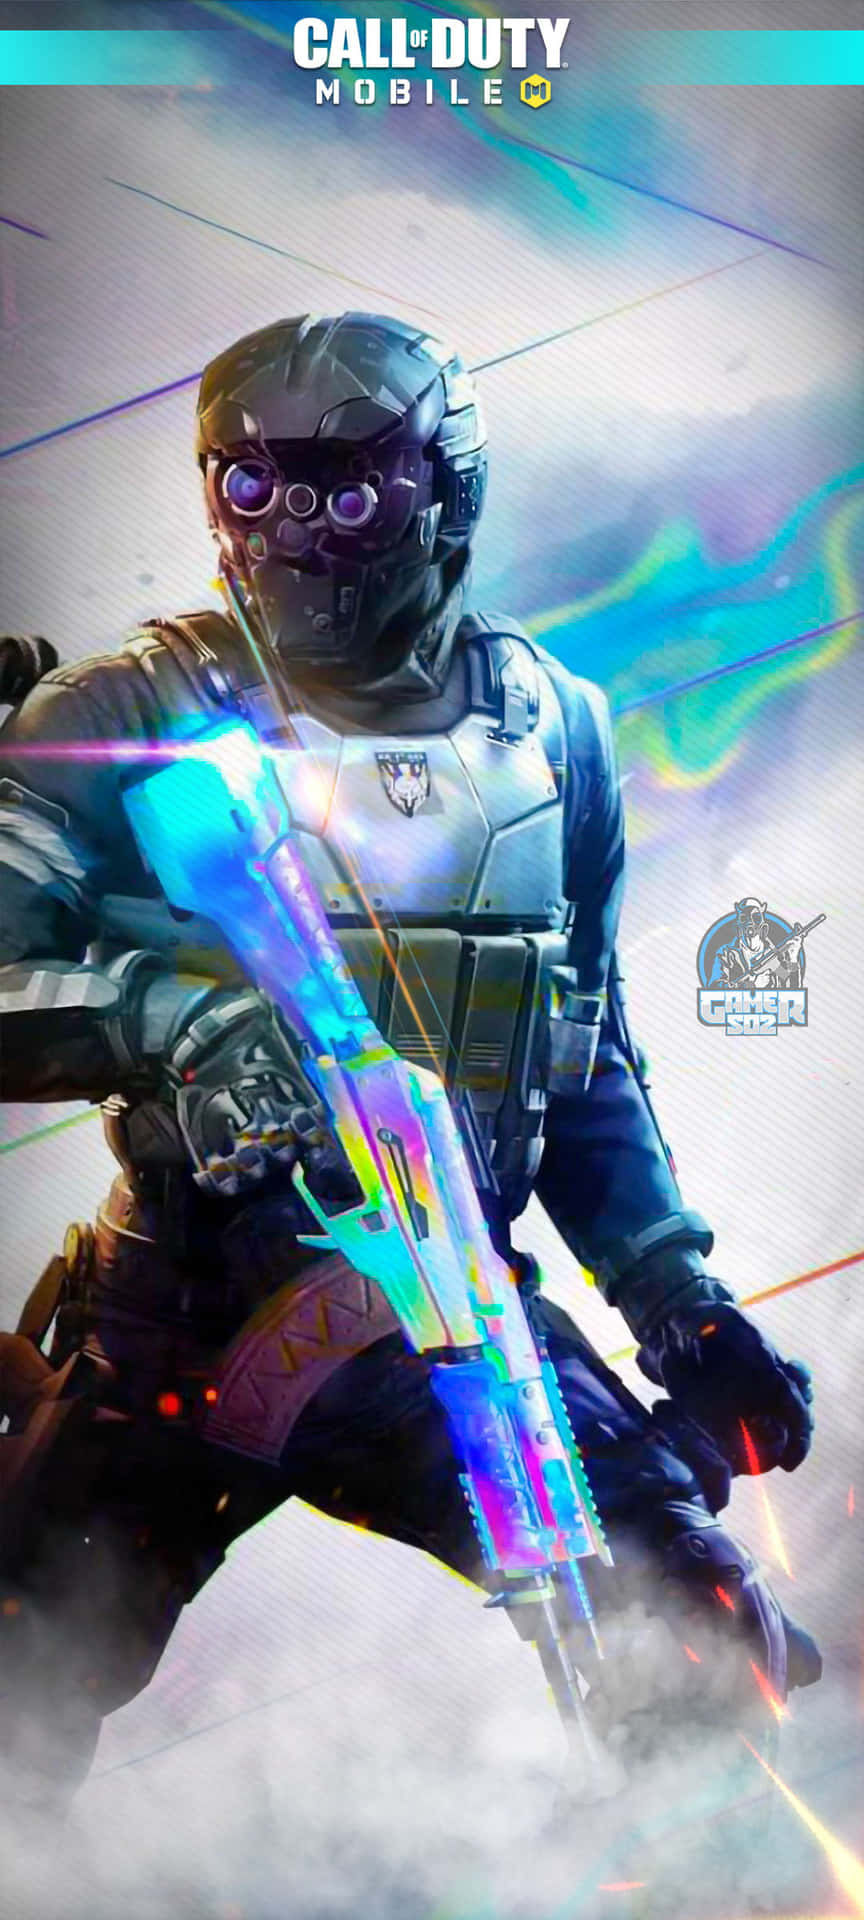 Cool COD Mobile Character Skins on Display Wallpaper